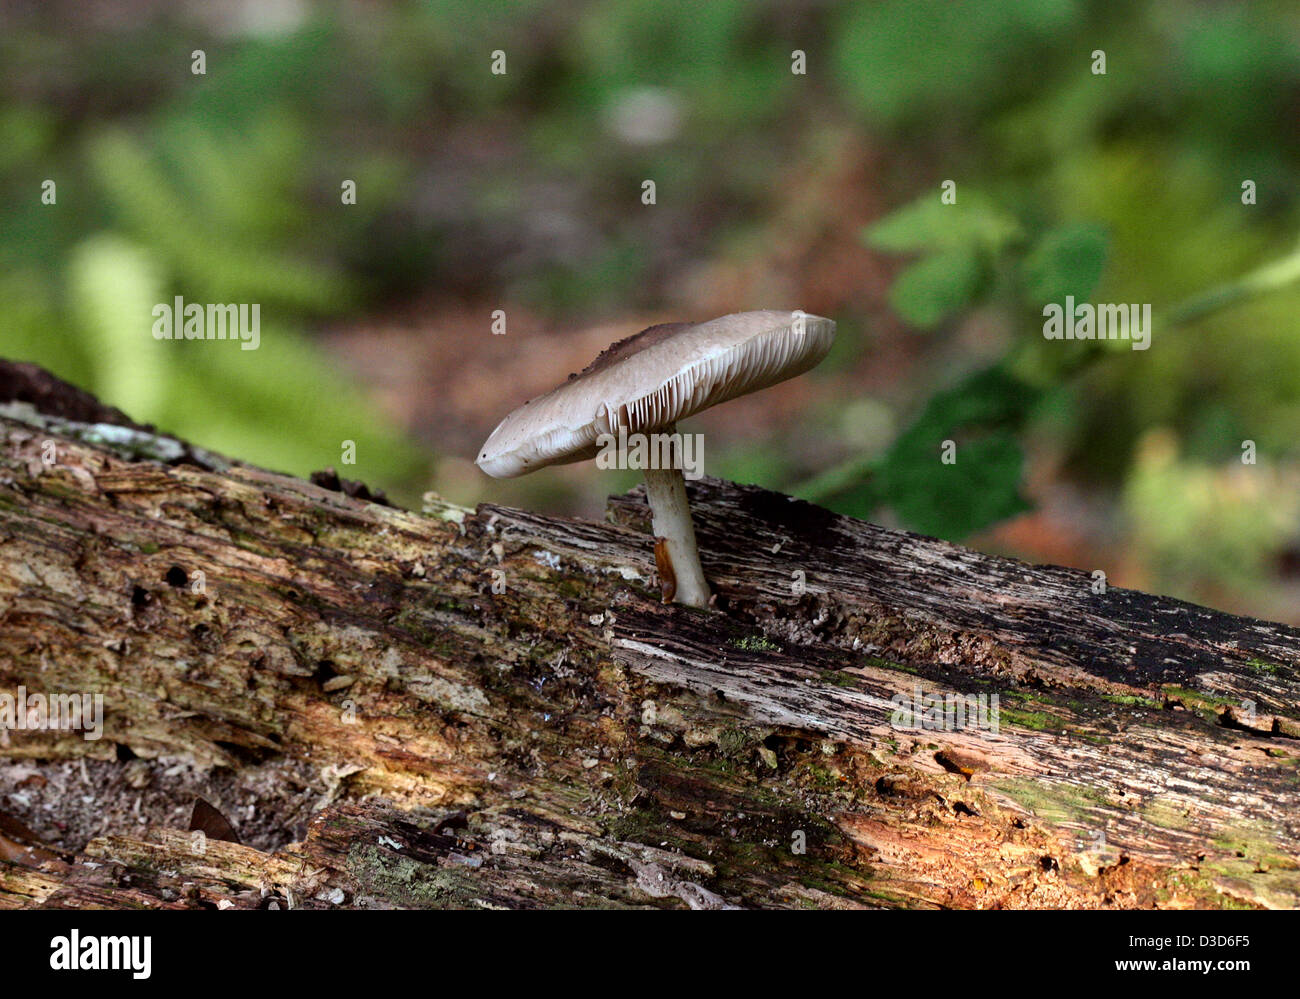 Willow Shield Fungus, Pluteus salicinus, Pluteaceae. Growing on Dead Wood. Stock Photo